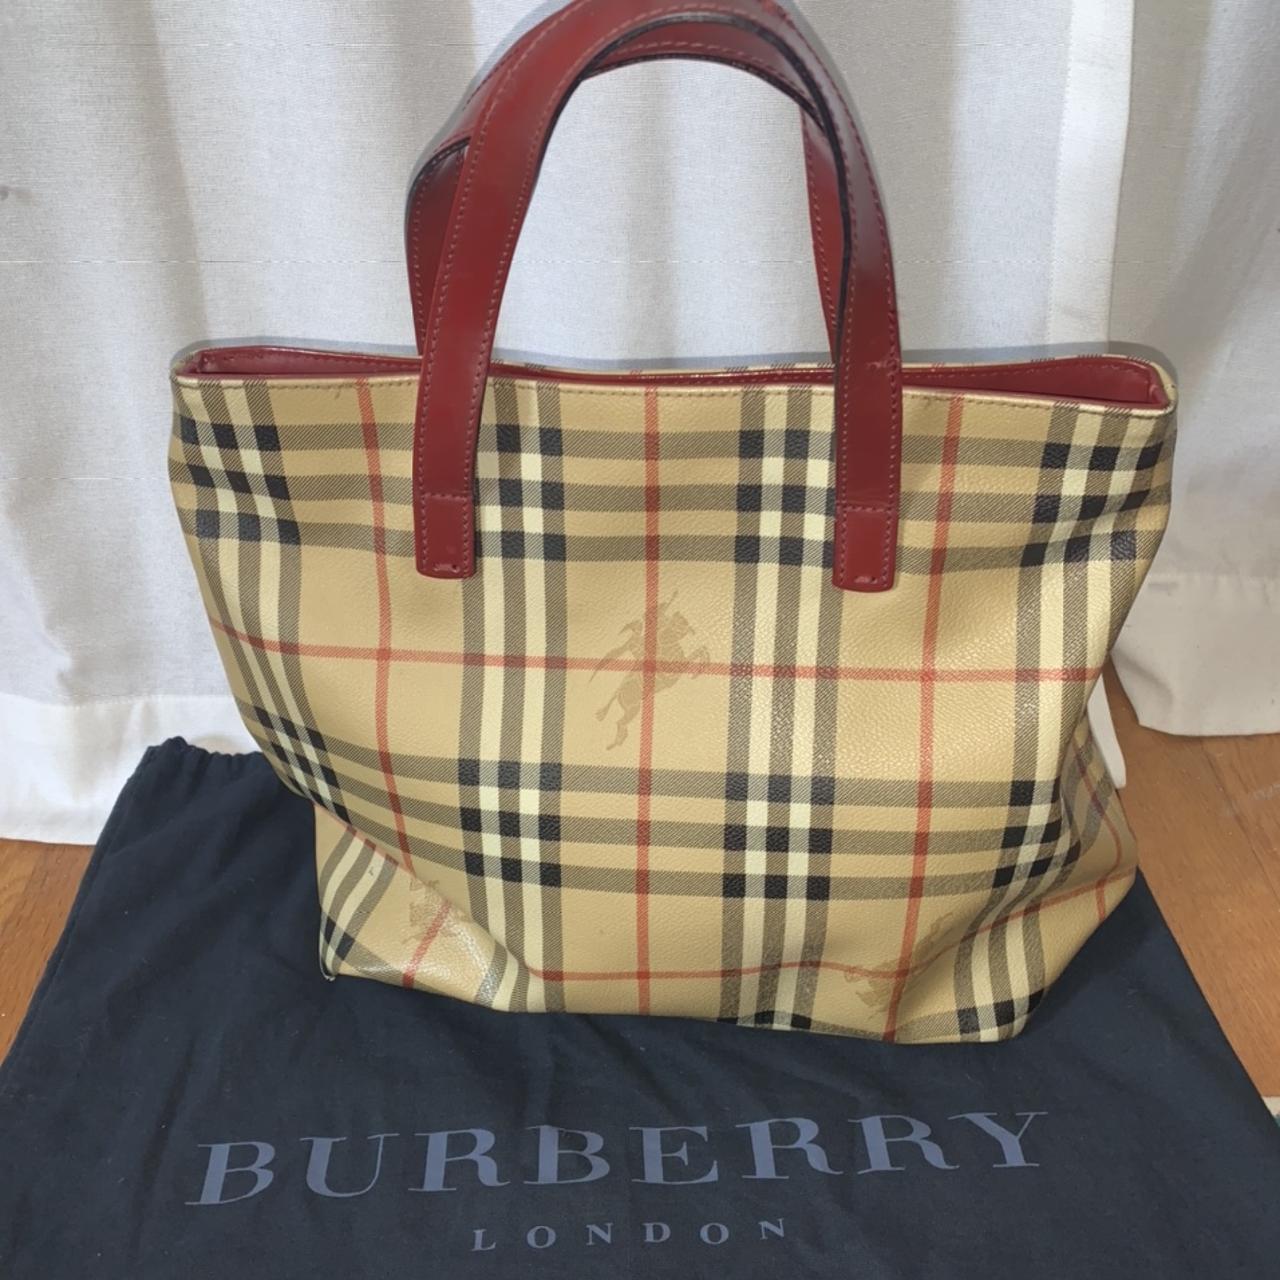 Little Used - Authentic Burberry bag with dust bag made from